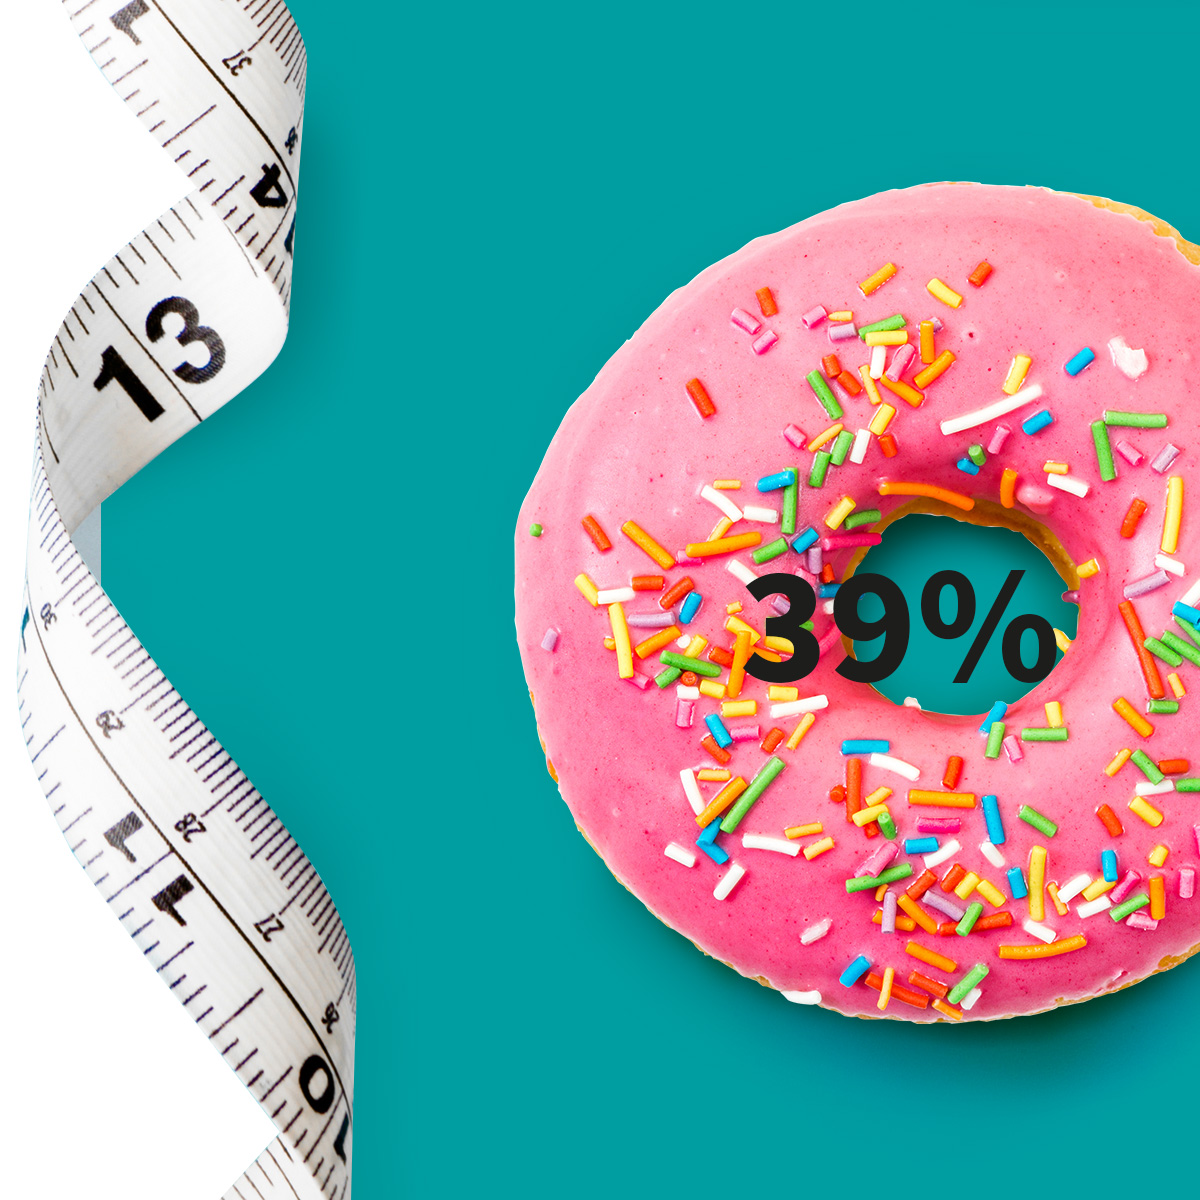 [.NL-nl Netherlands (dutch)] •	A measuring tape and a doughnut with pink icing and colourful sugar sprinkle as a metaphor for obesity